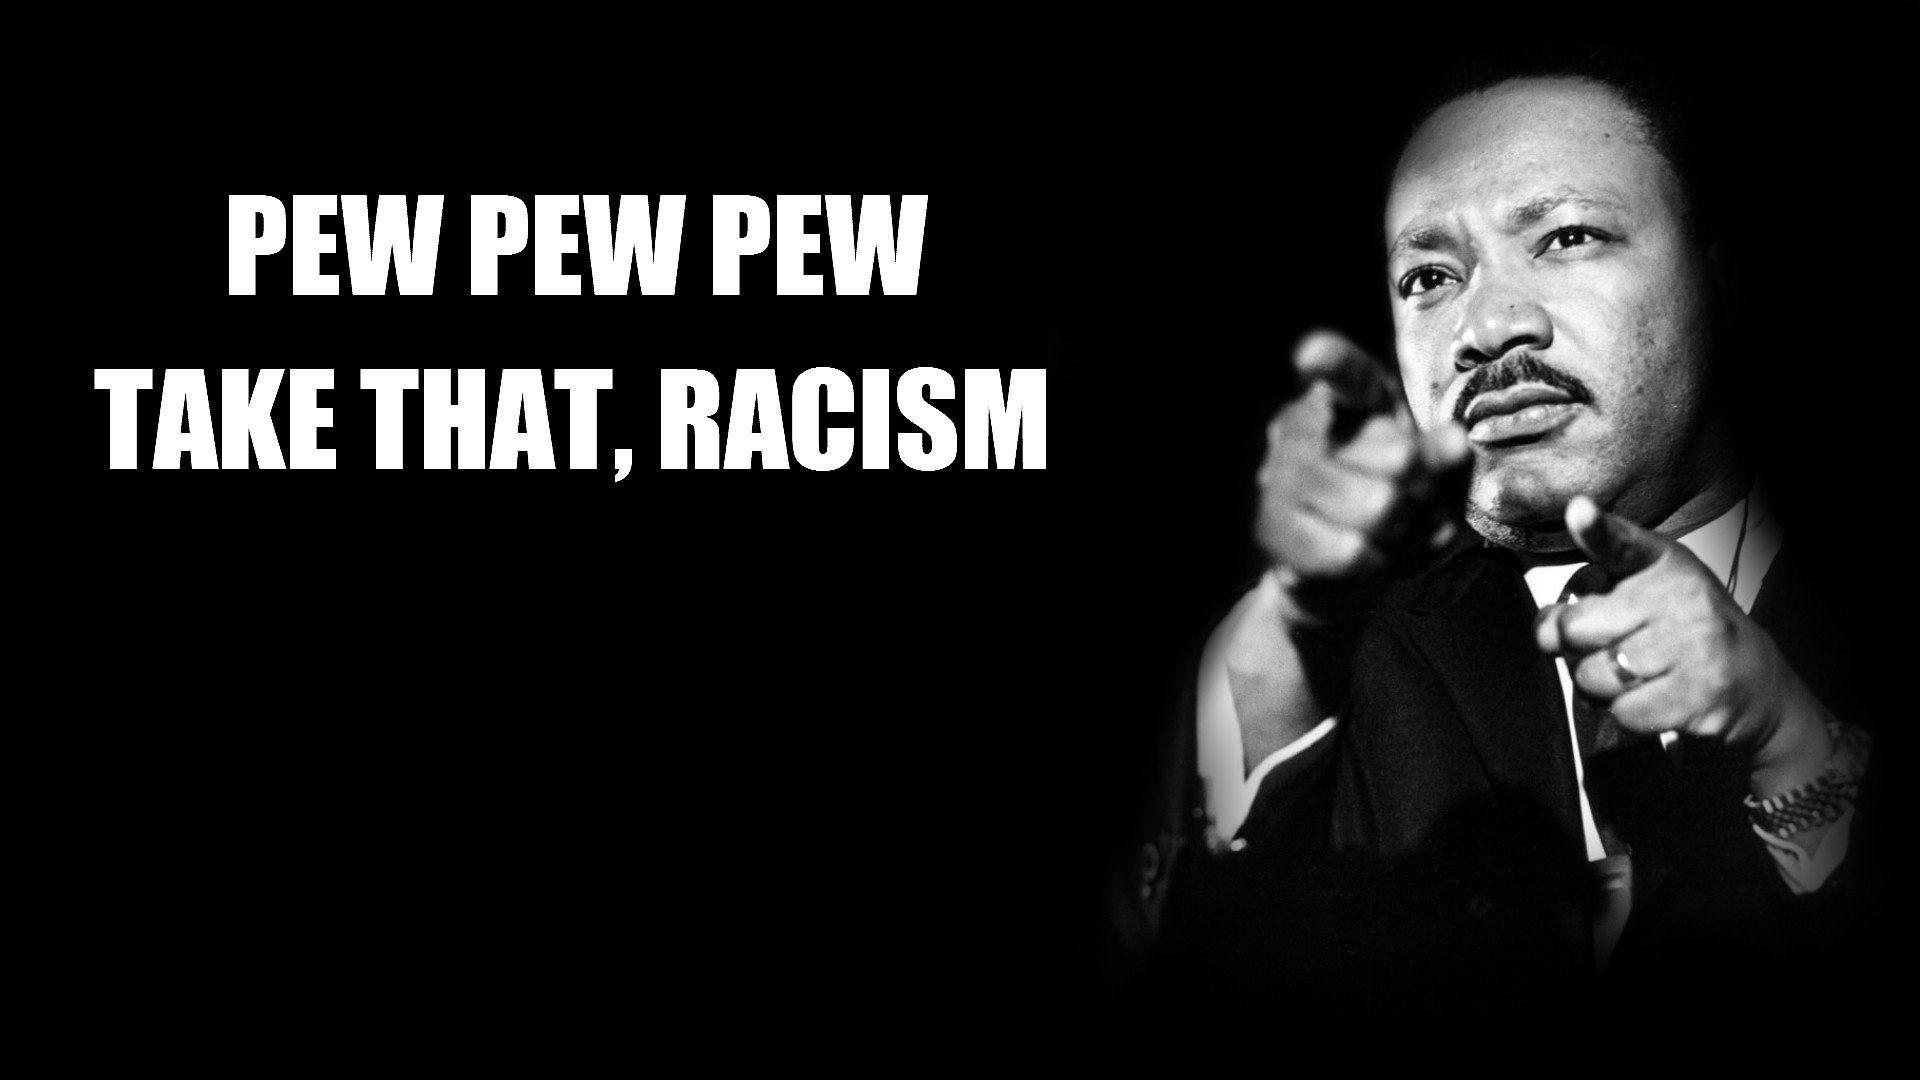 dank wallpaper version - added by notorc at Im not racist